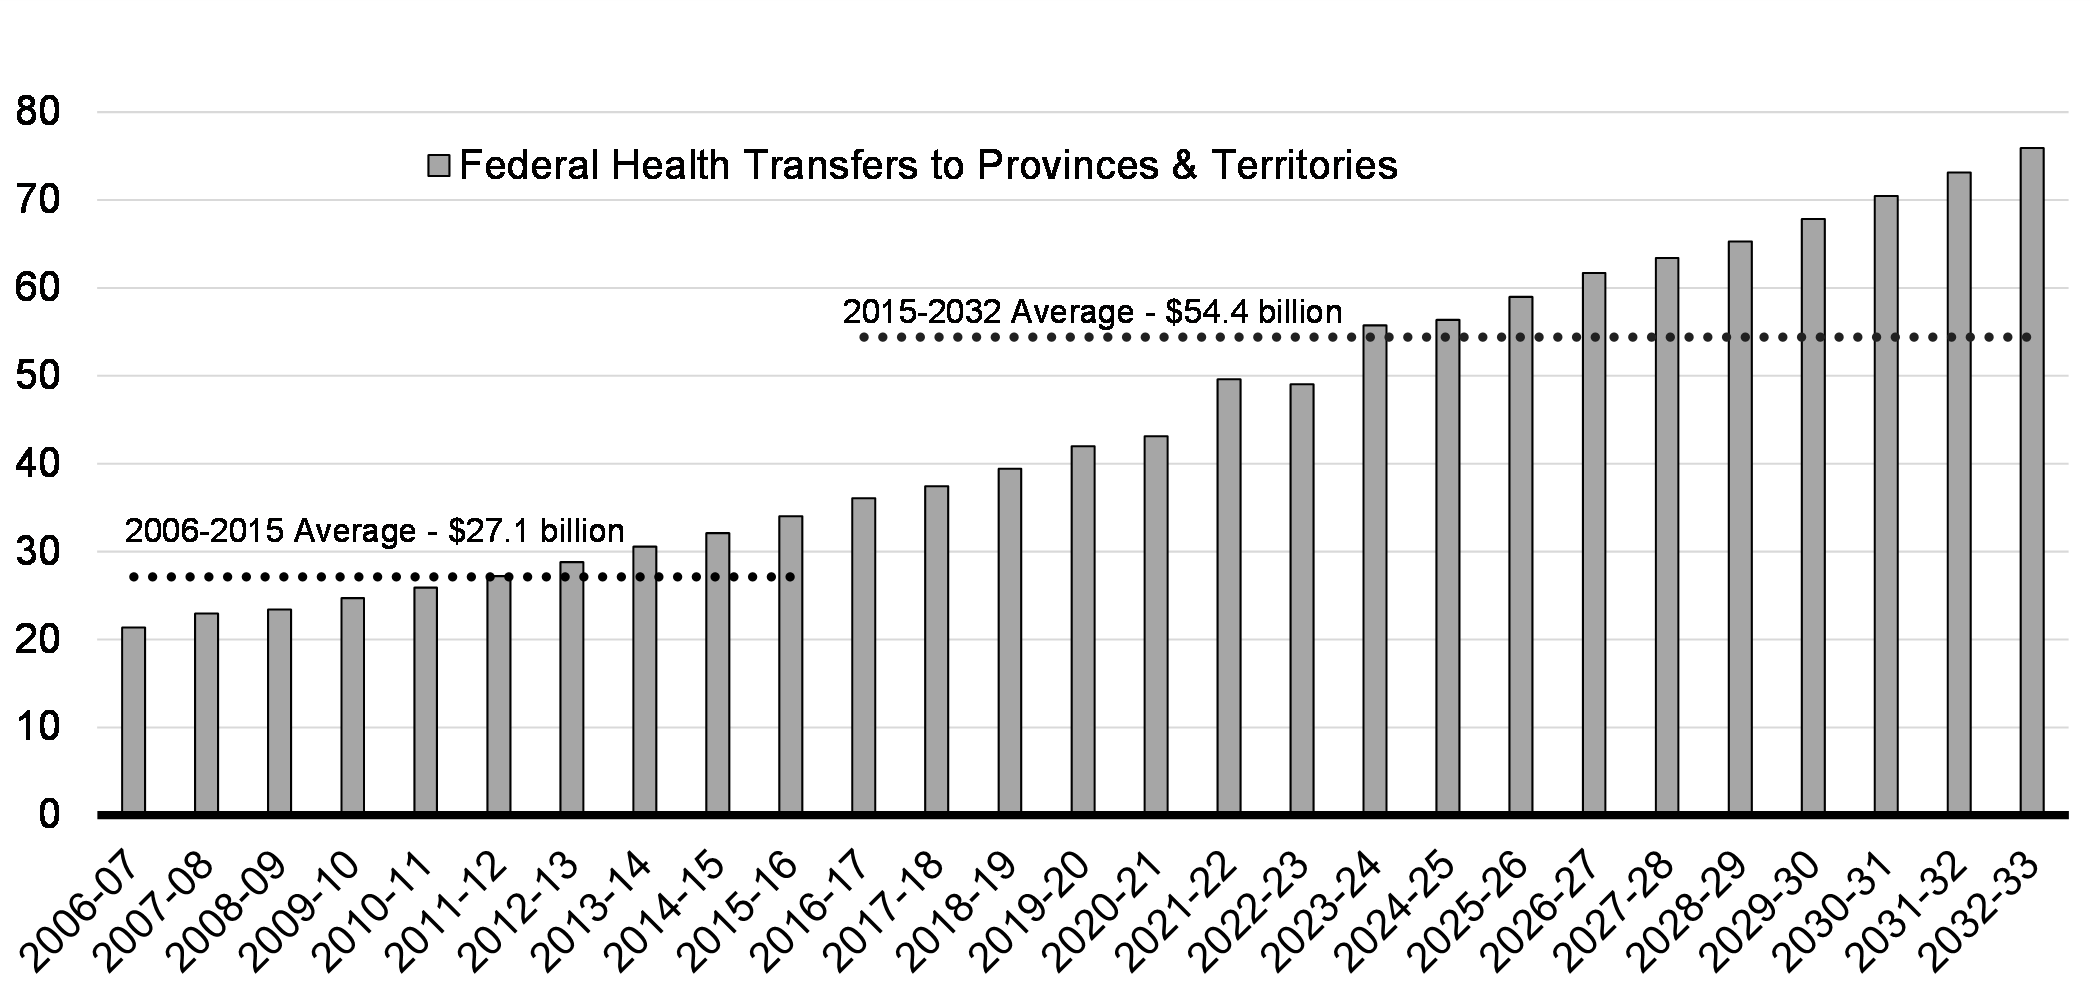 Chart 2.1: Federal Health Transfers to Provinces and Territories, 2006-07 to 2032-33